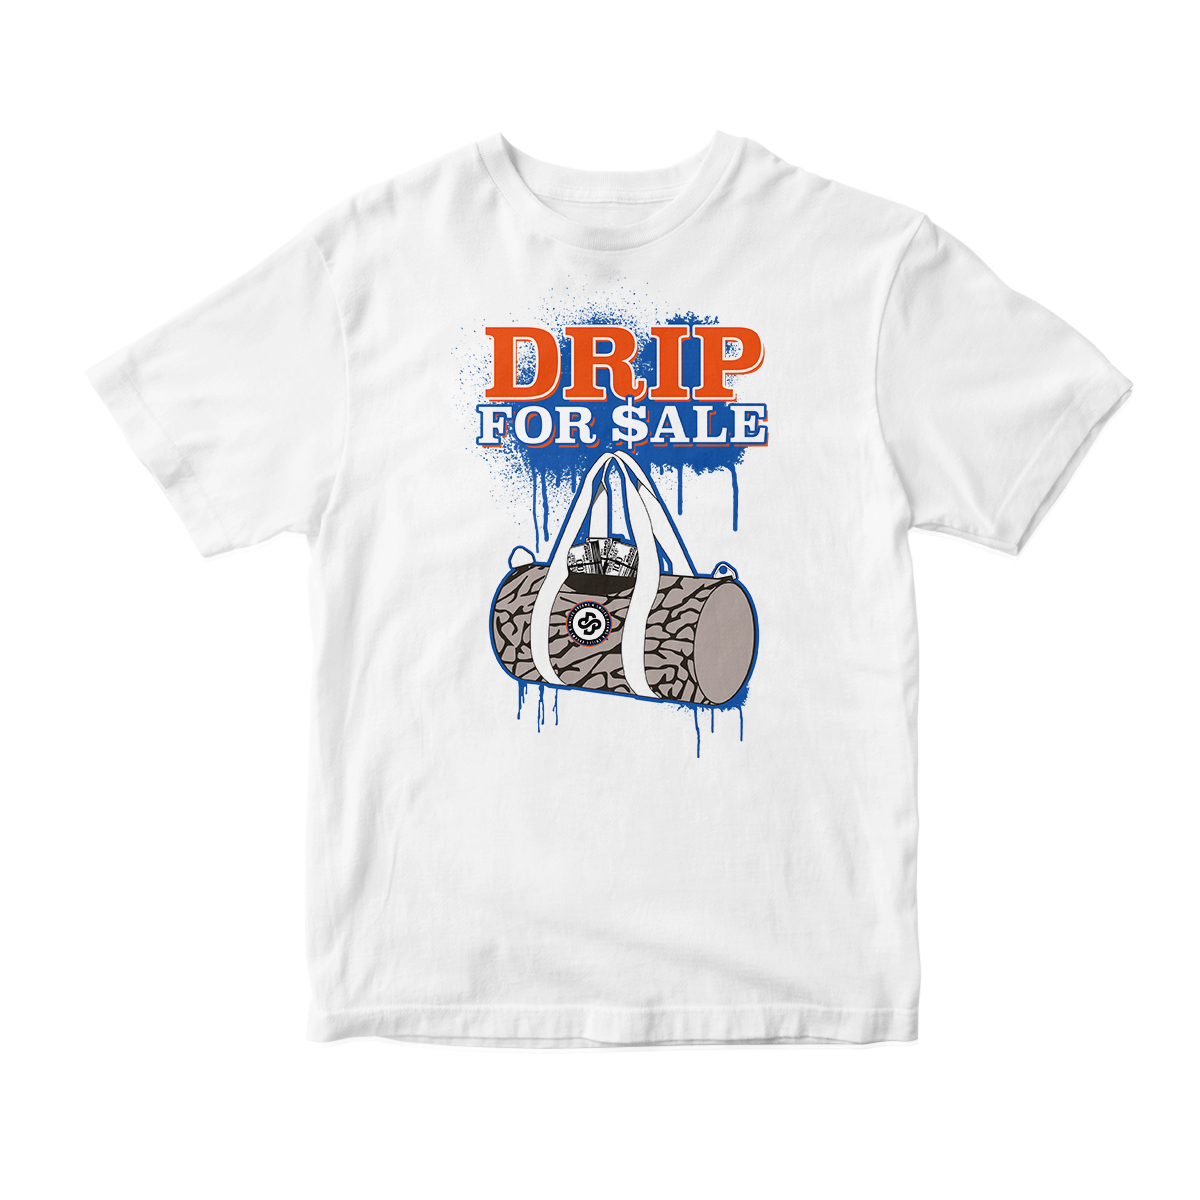 'Drip For Sale' in Knicks CW Unisex Short Sleeve Tee